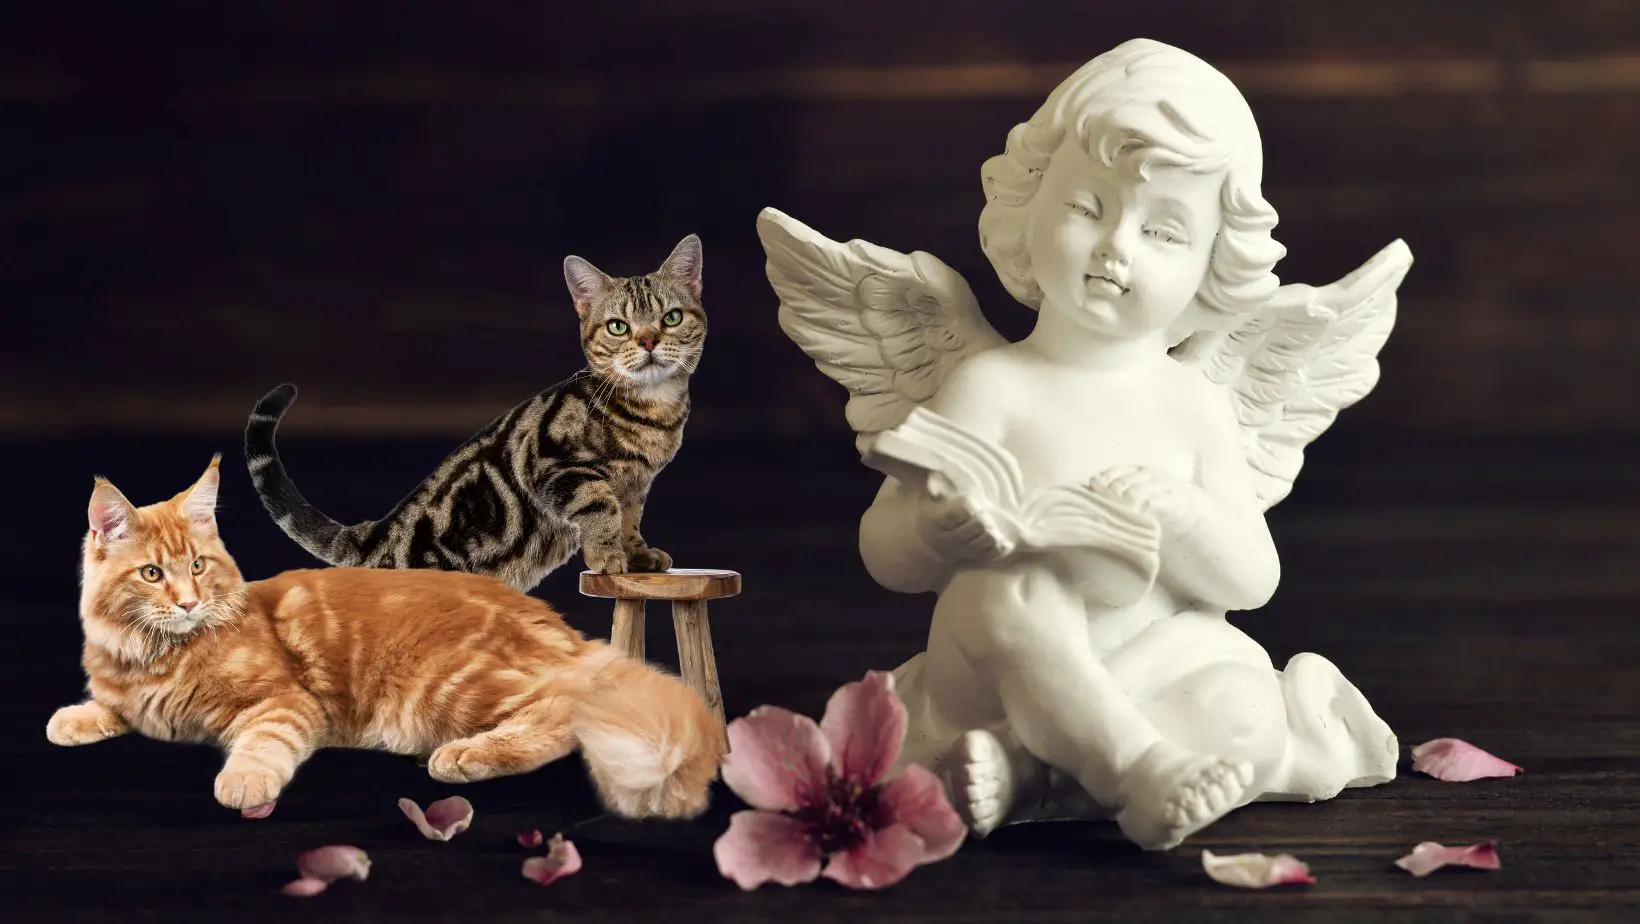 Can Cats See Guardian Angels?